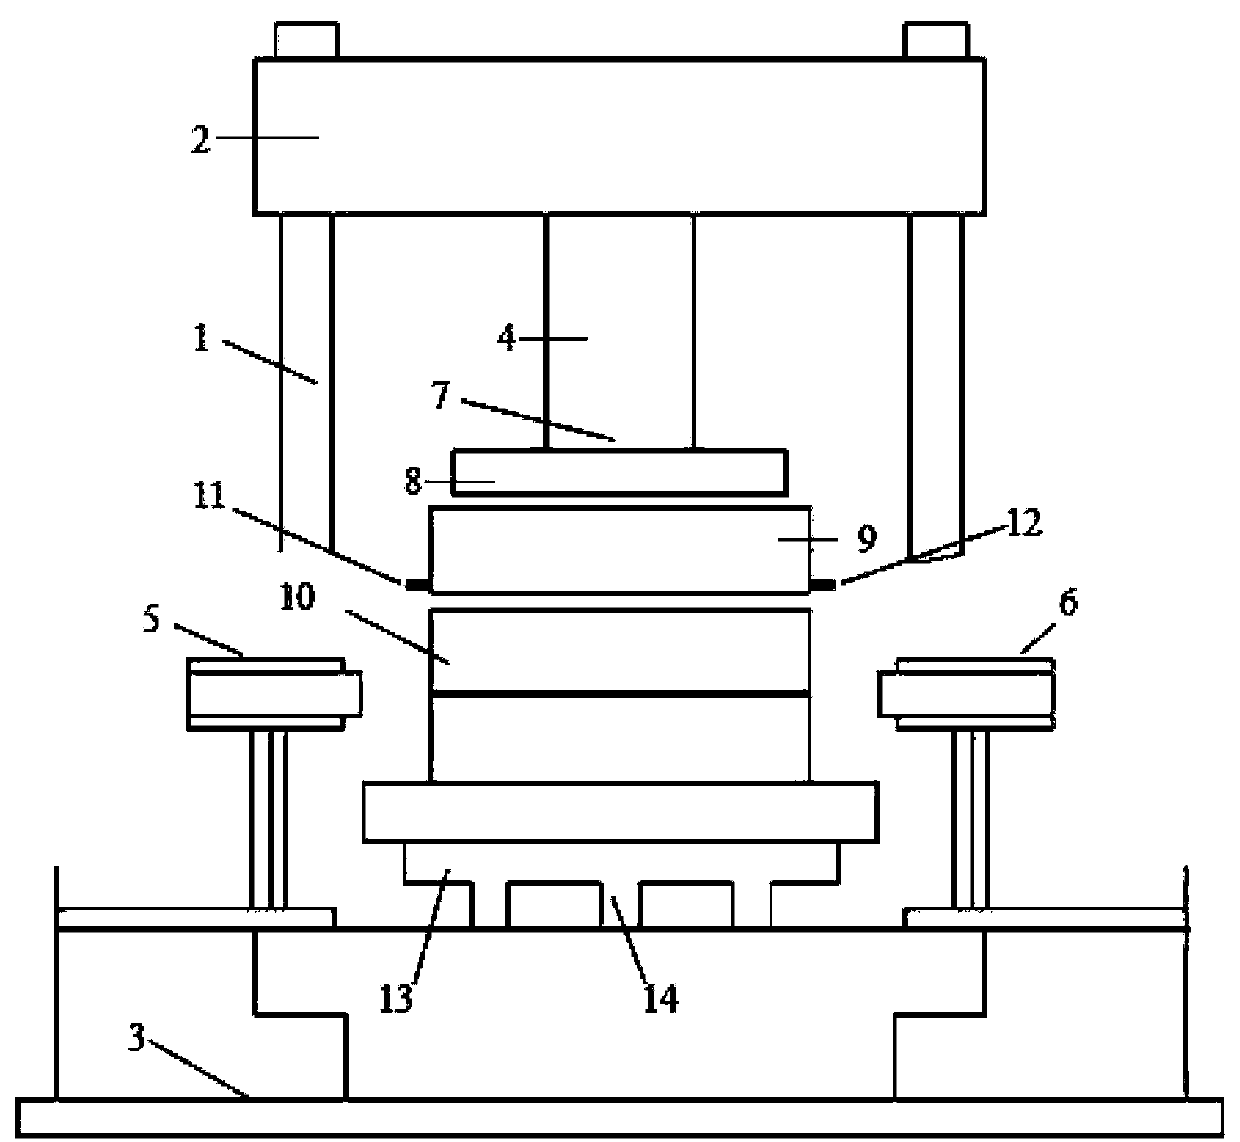 Test device for determining permeability of large-scale single fracture medium under triaxial stress